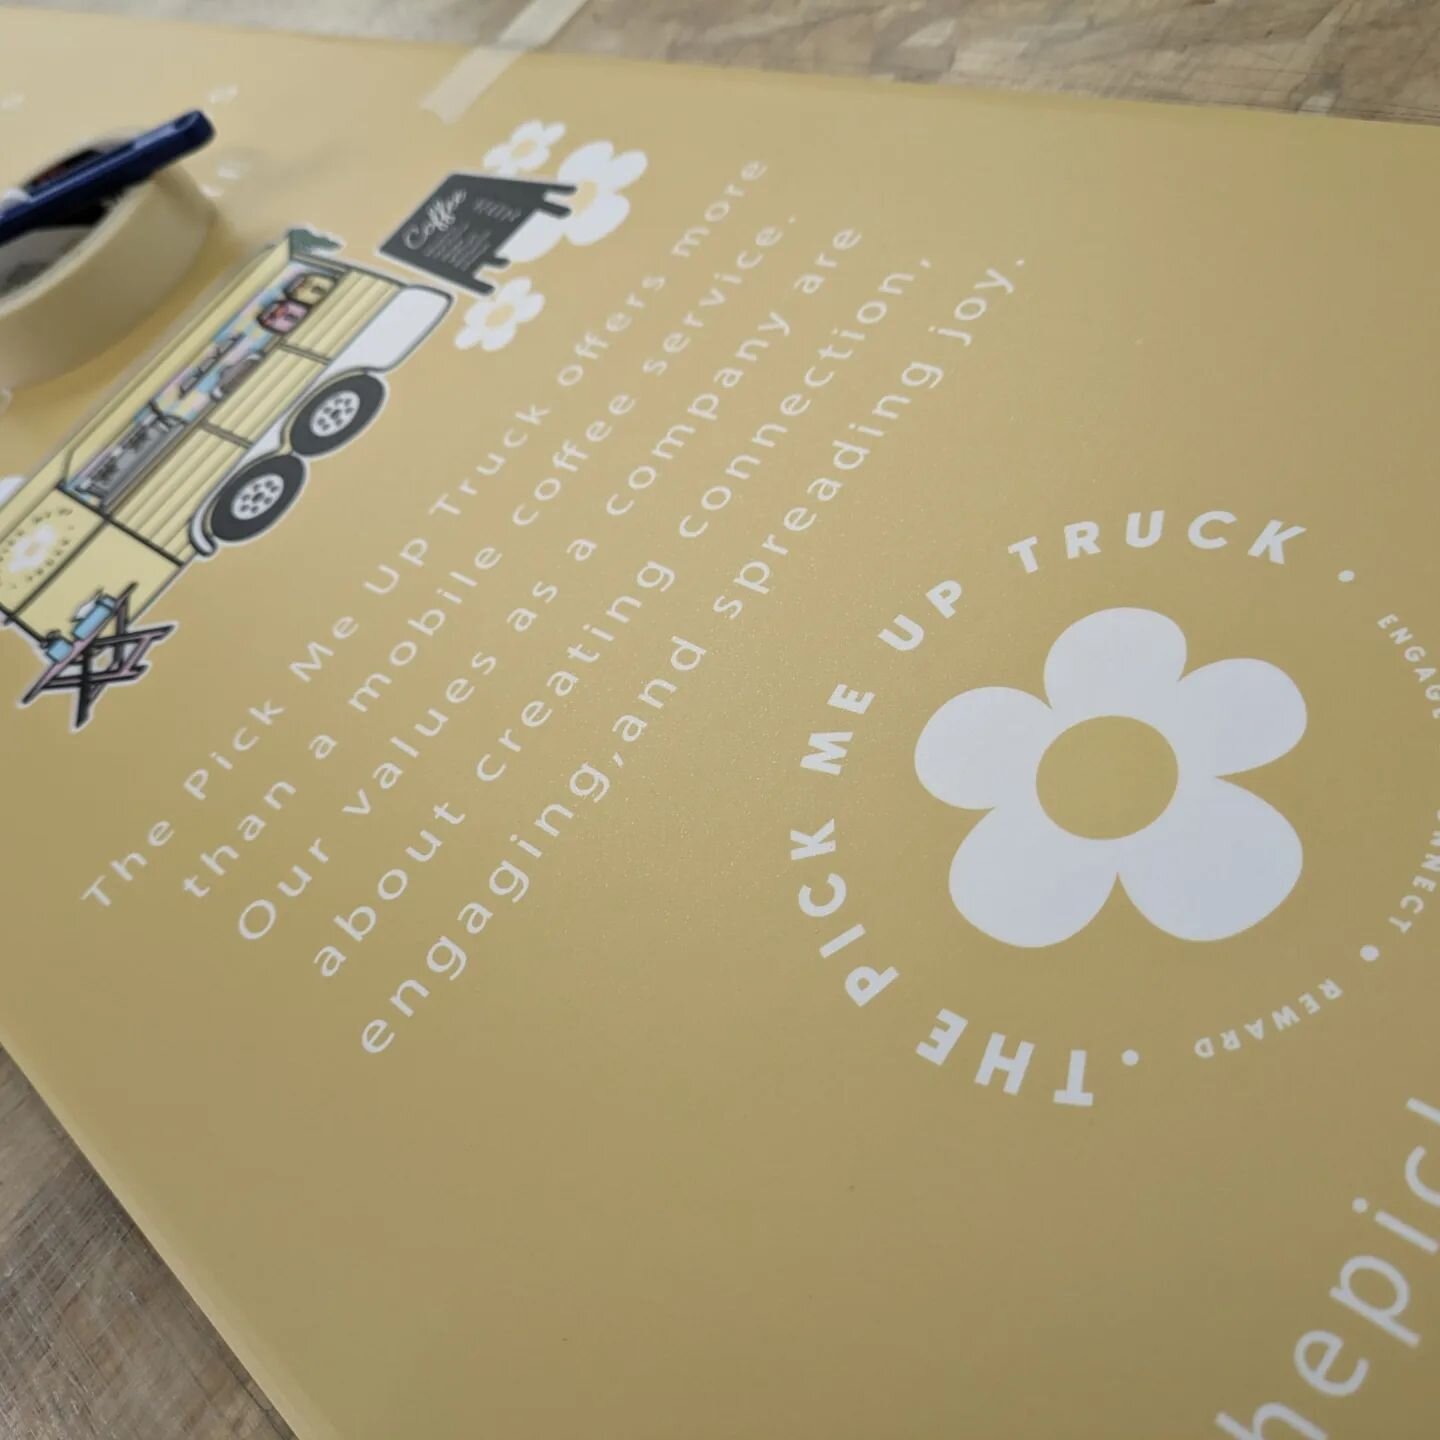 A little peek at the recently completed work for Sally and the team at @thepickmeupco. Serving more than just coffee and cakes - the team are all about creating connections and spreading joy. They could be your next office pop-up! @thepickmeuptruck_ 